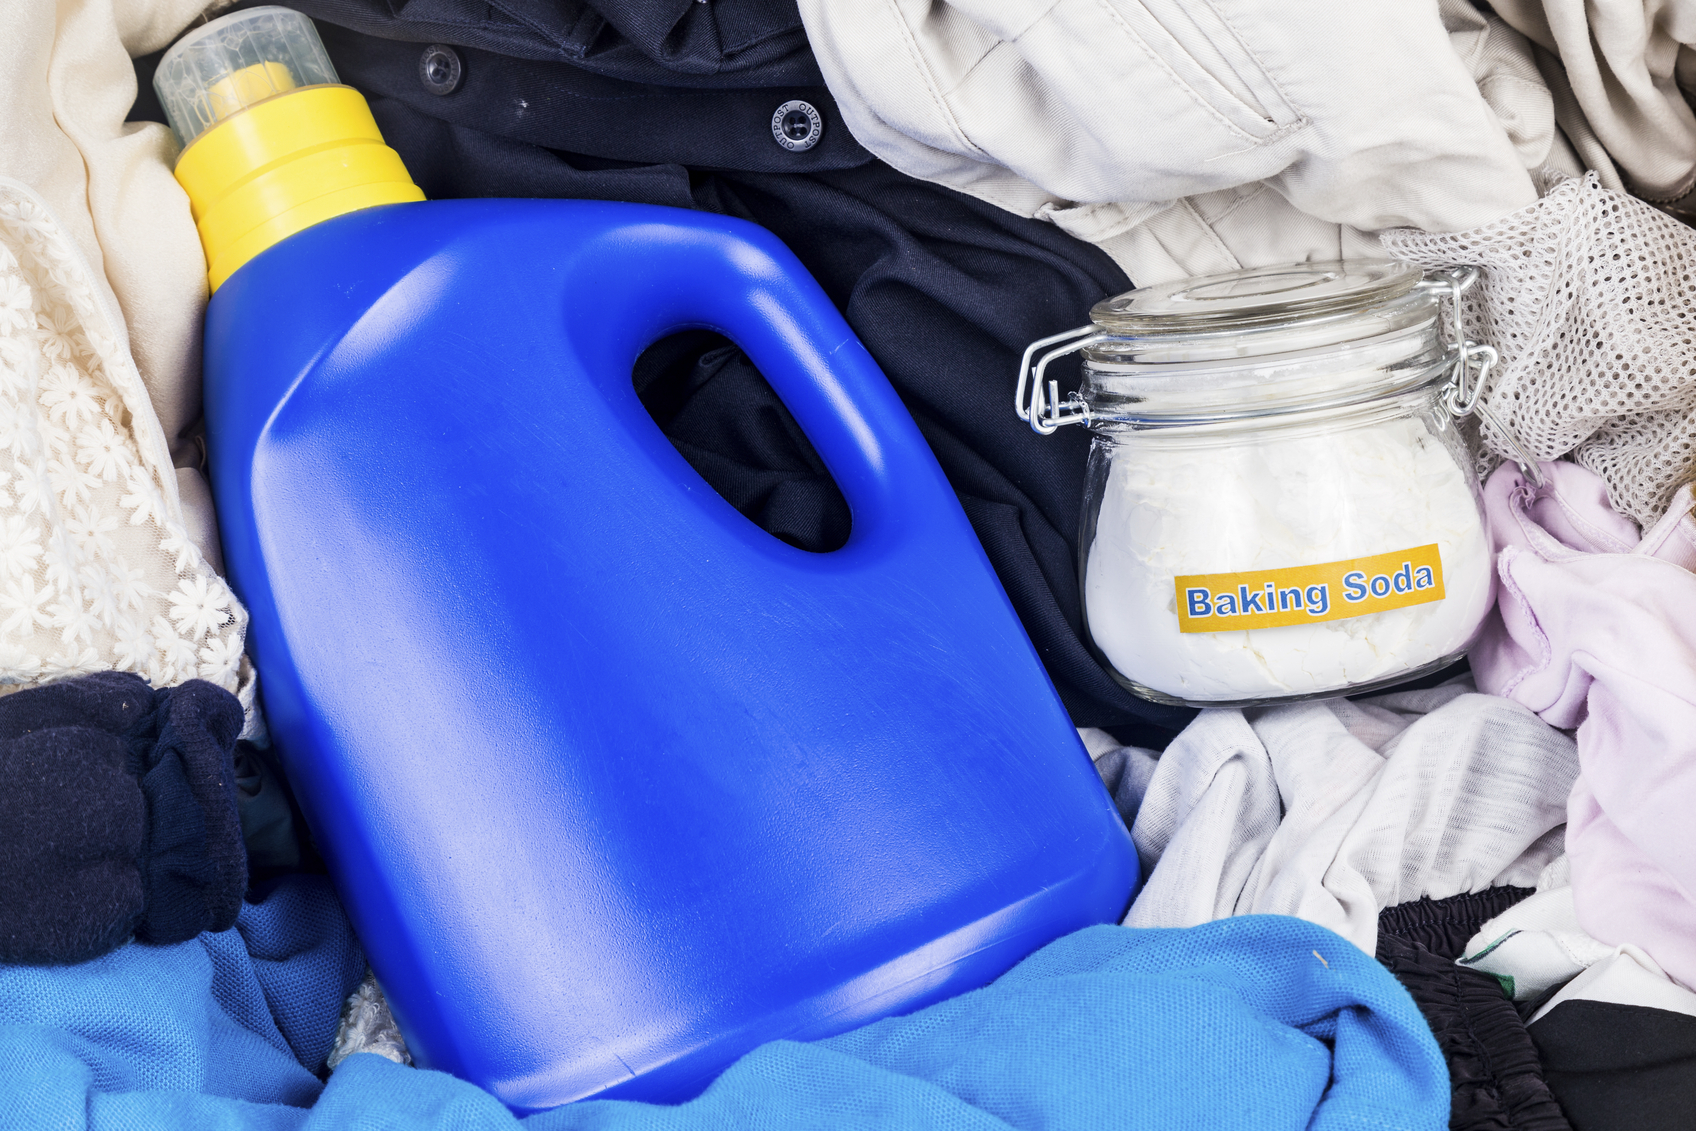 How to Make Your Own Homemade Laundry Detergent